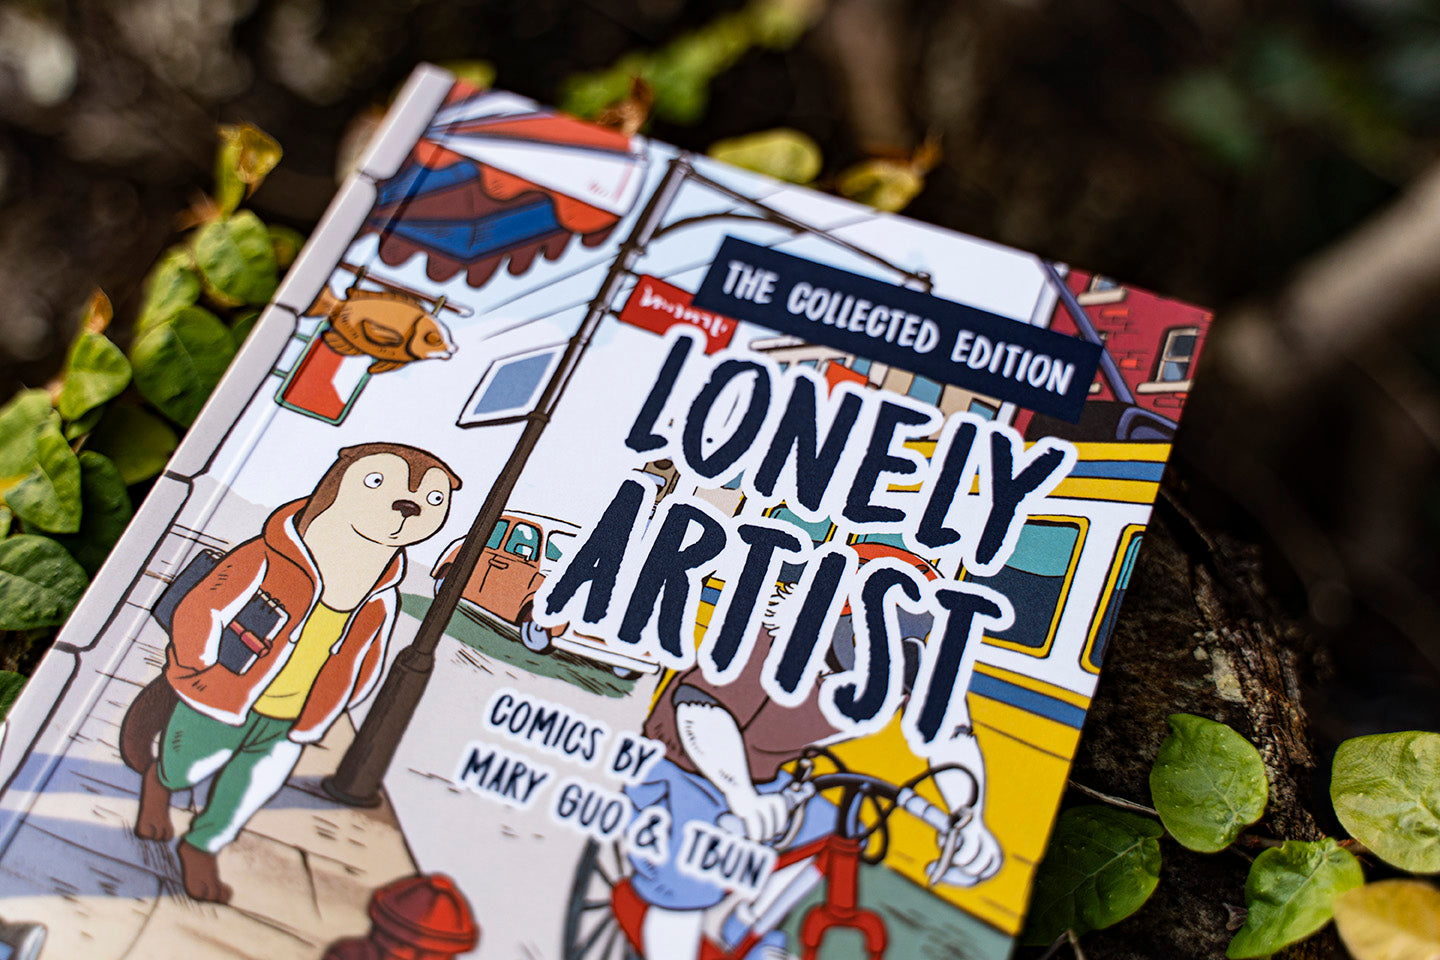 Lonely Artist: The Collected Edition